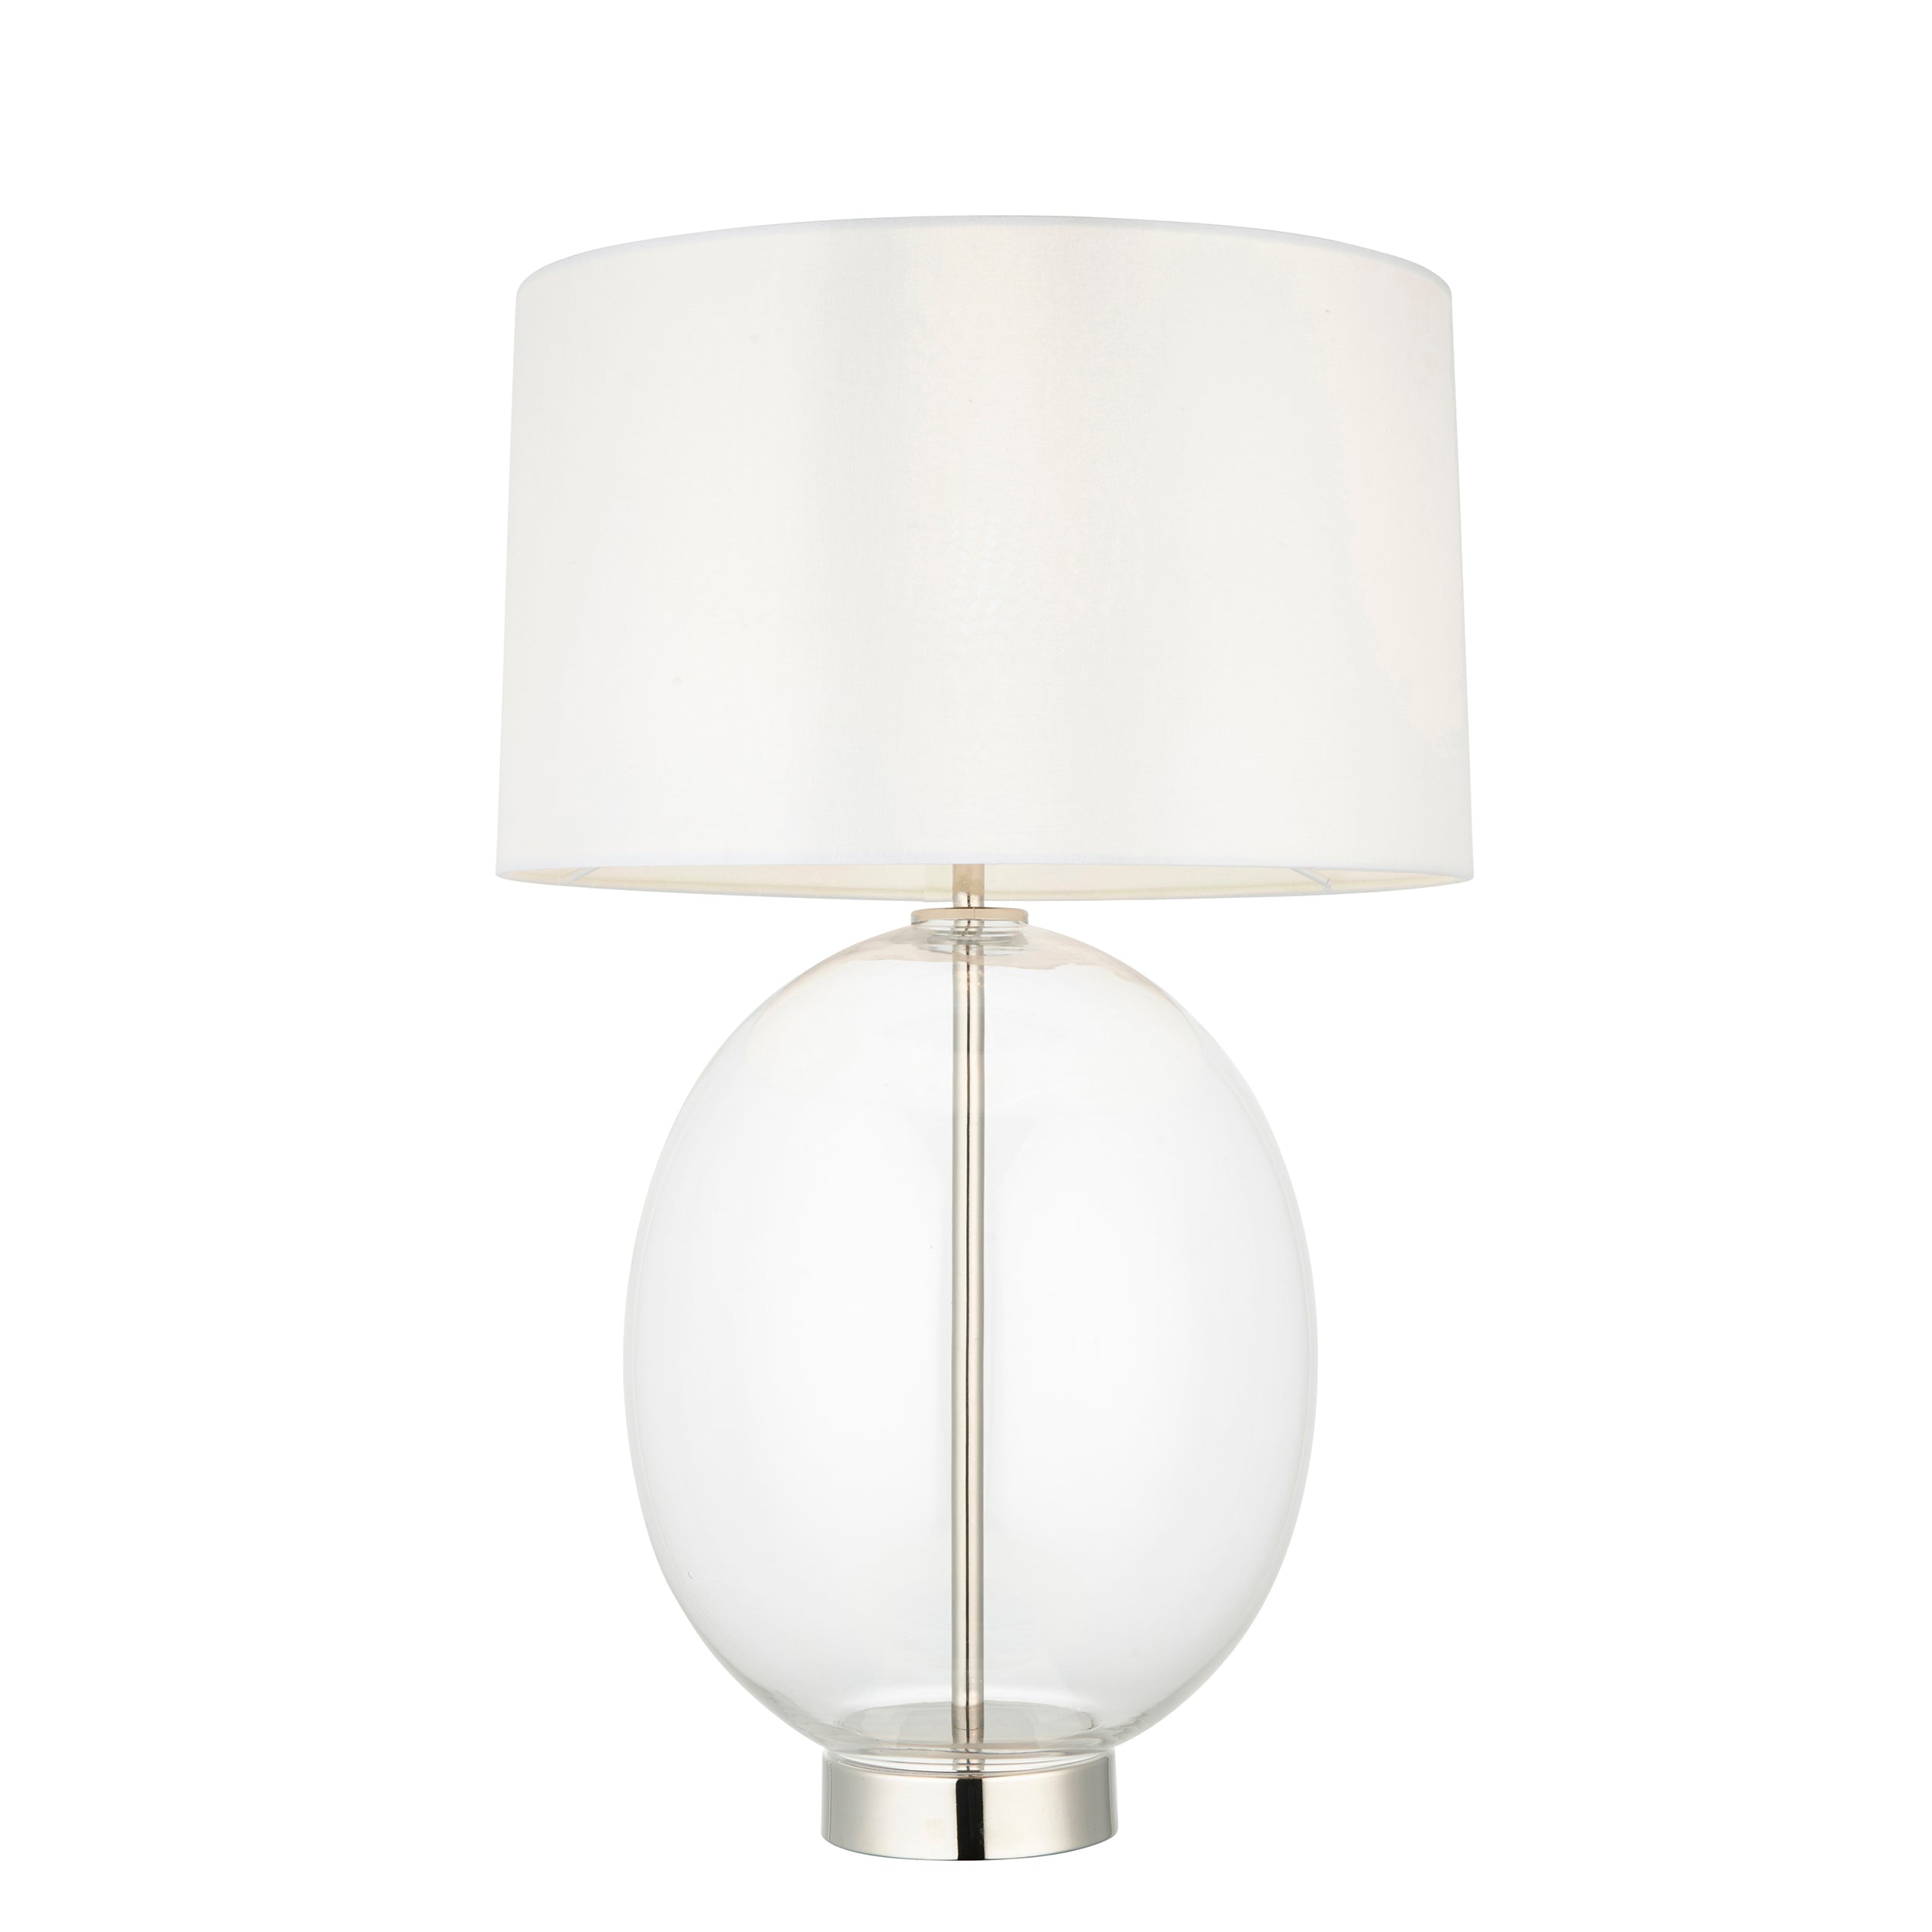 Lightologist Bright nickel plate & clear glass with vintage white fabric Complete Table Light